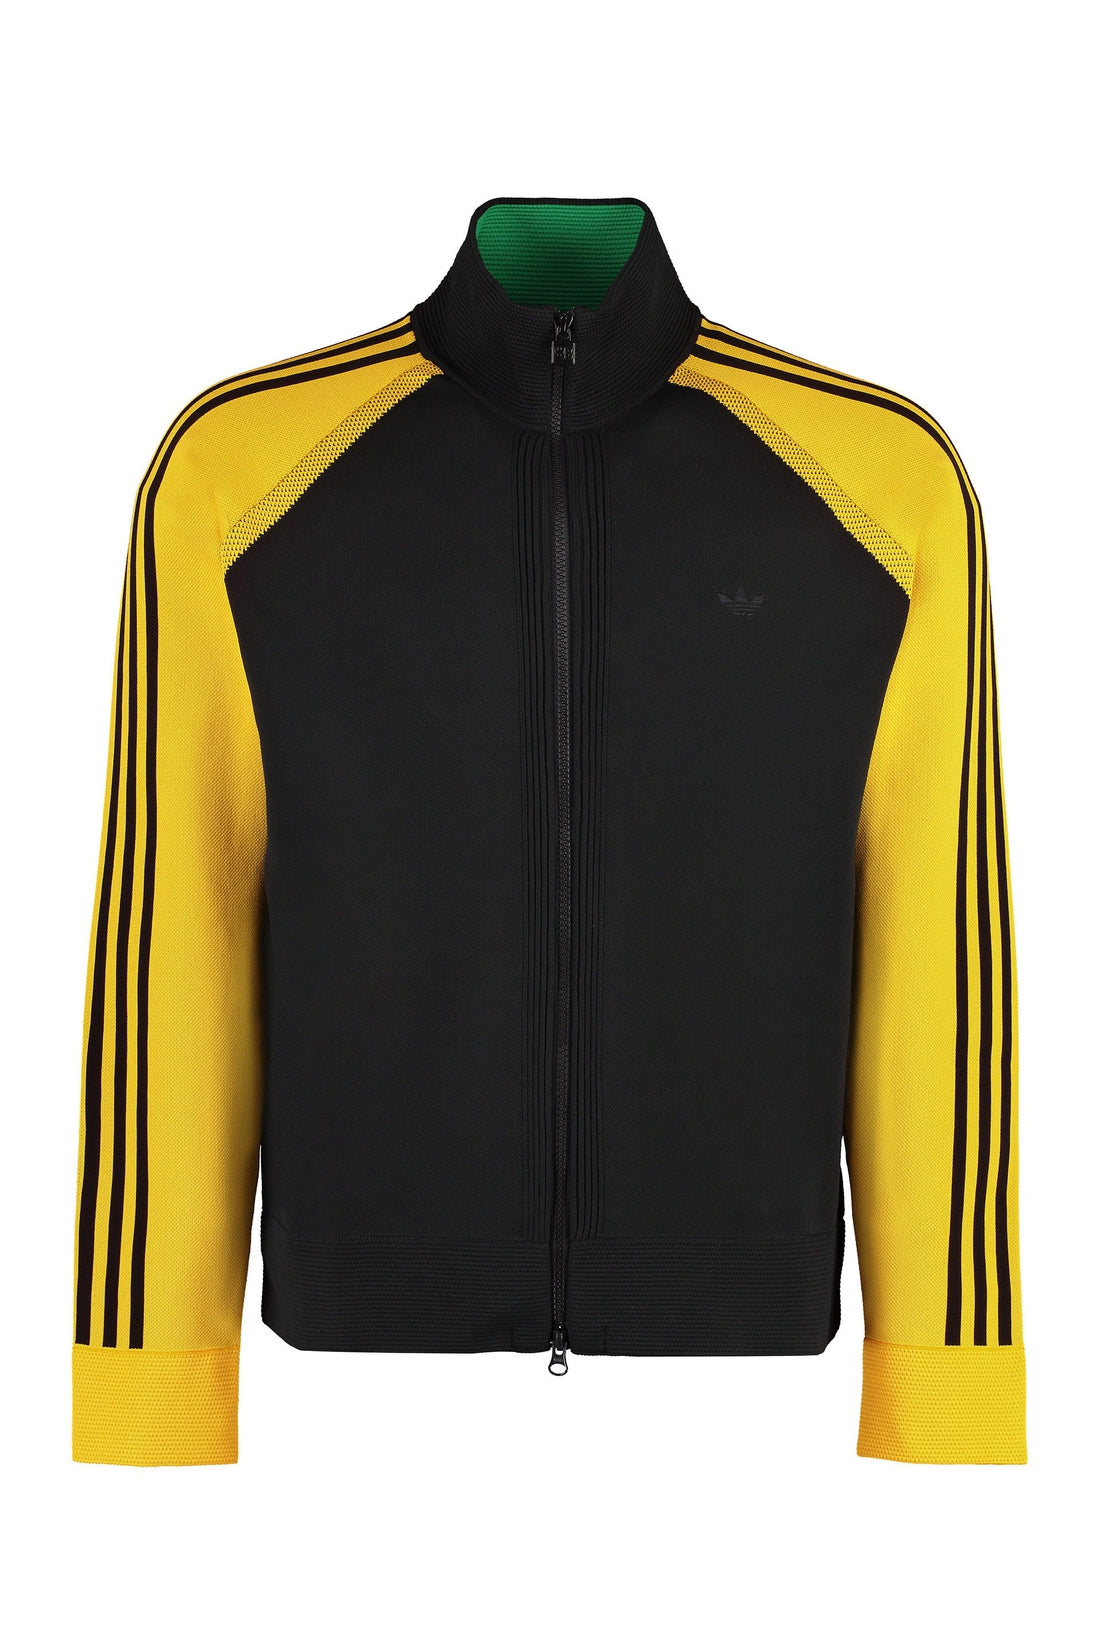 adidas-OUTLET-SALE-Adidas Originals by Wales Bonner -Knitted zip hoodie-ARCHIVIST